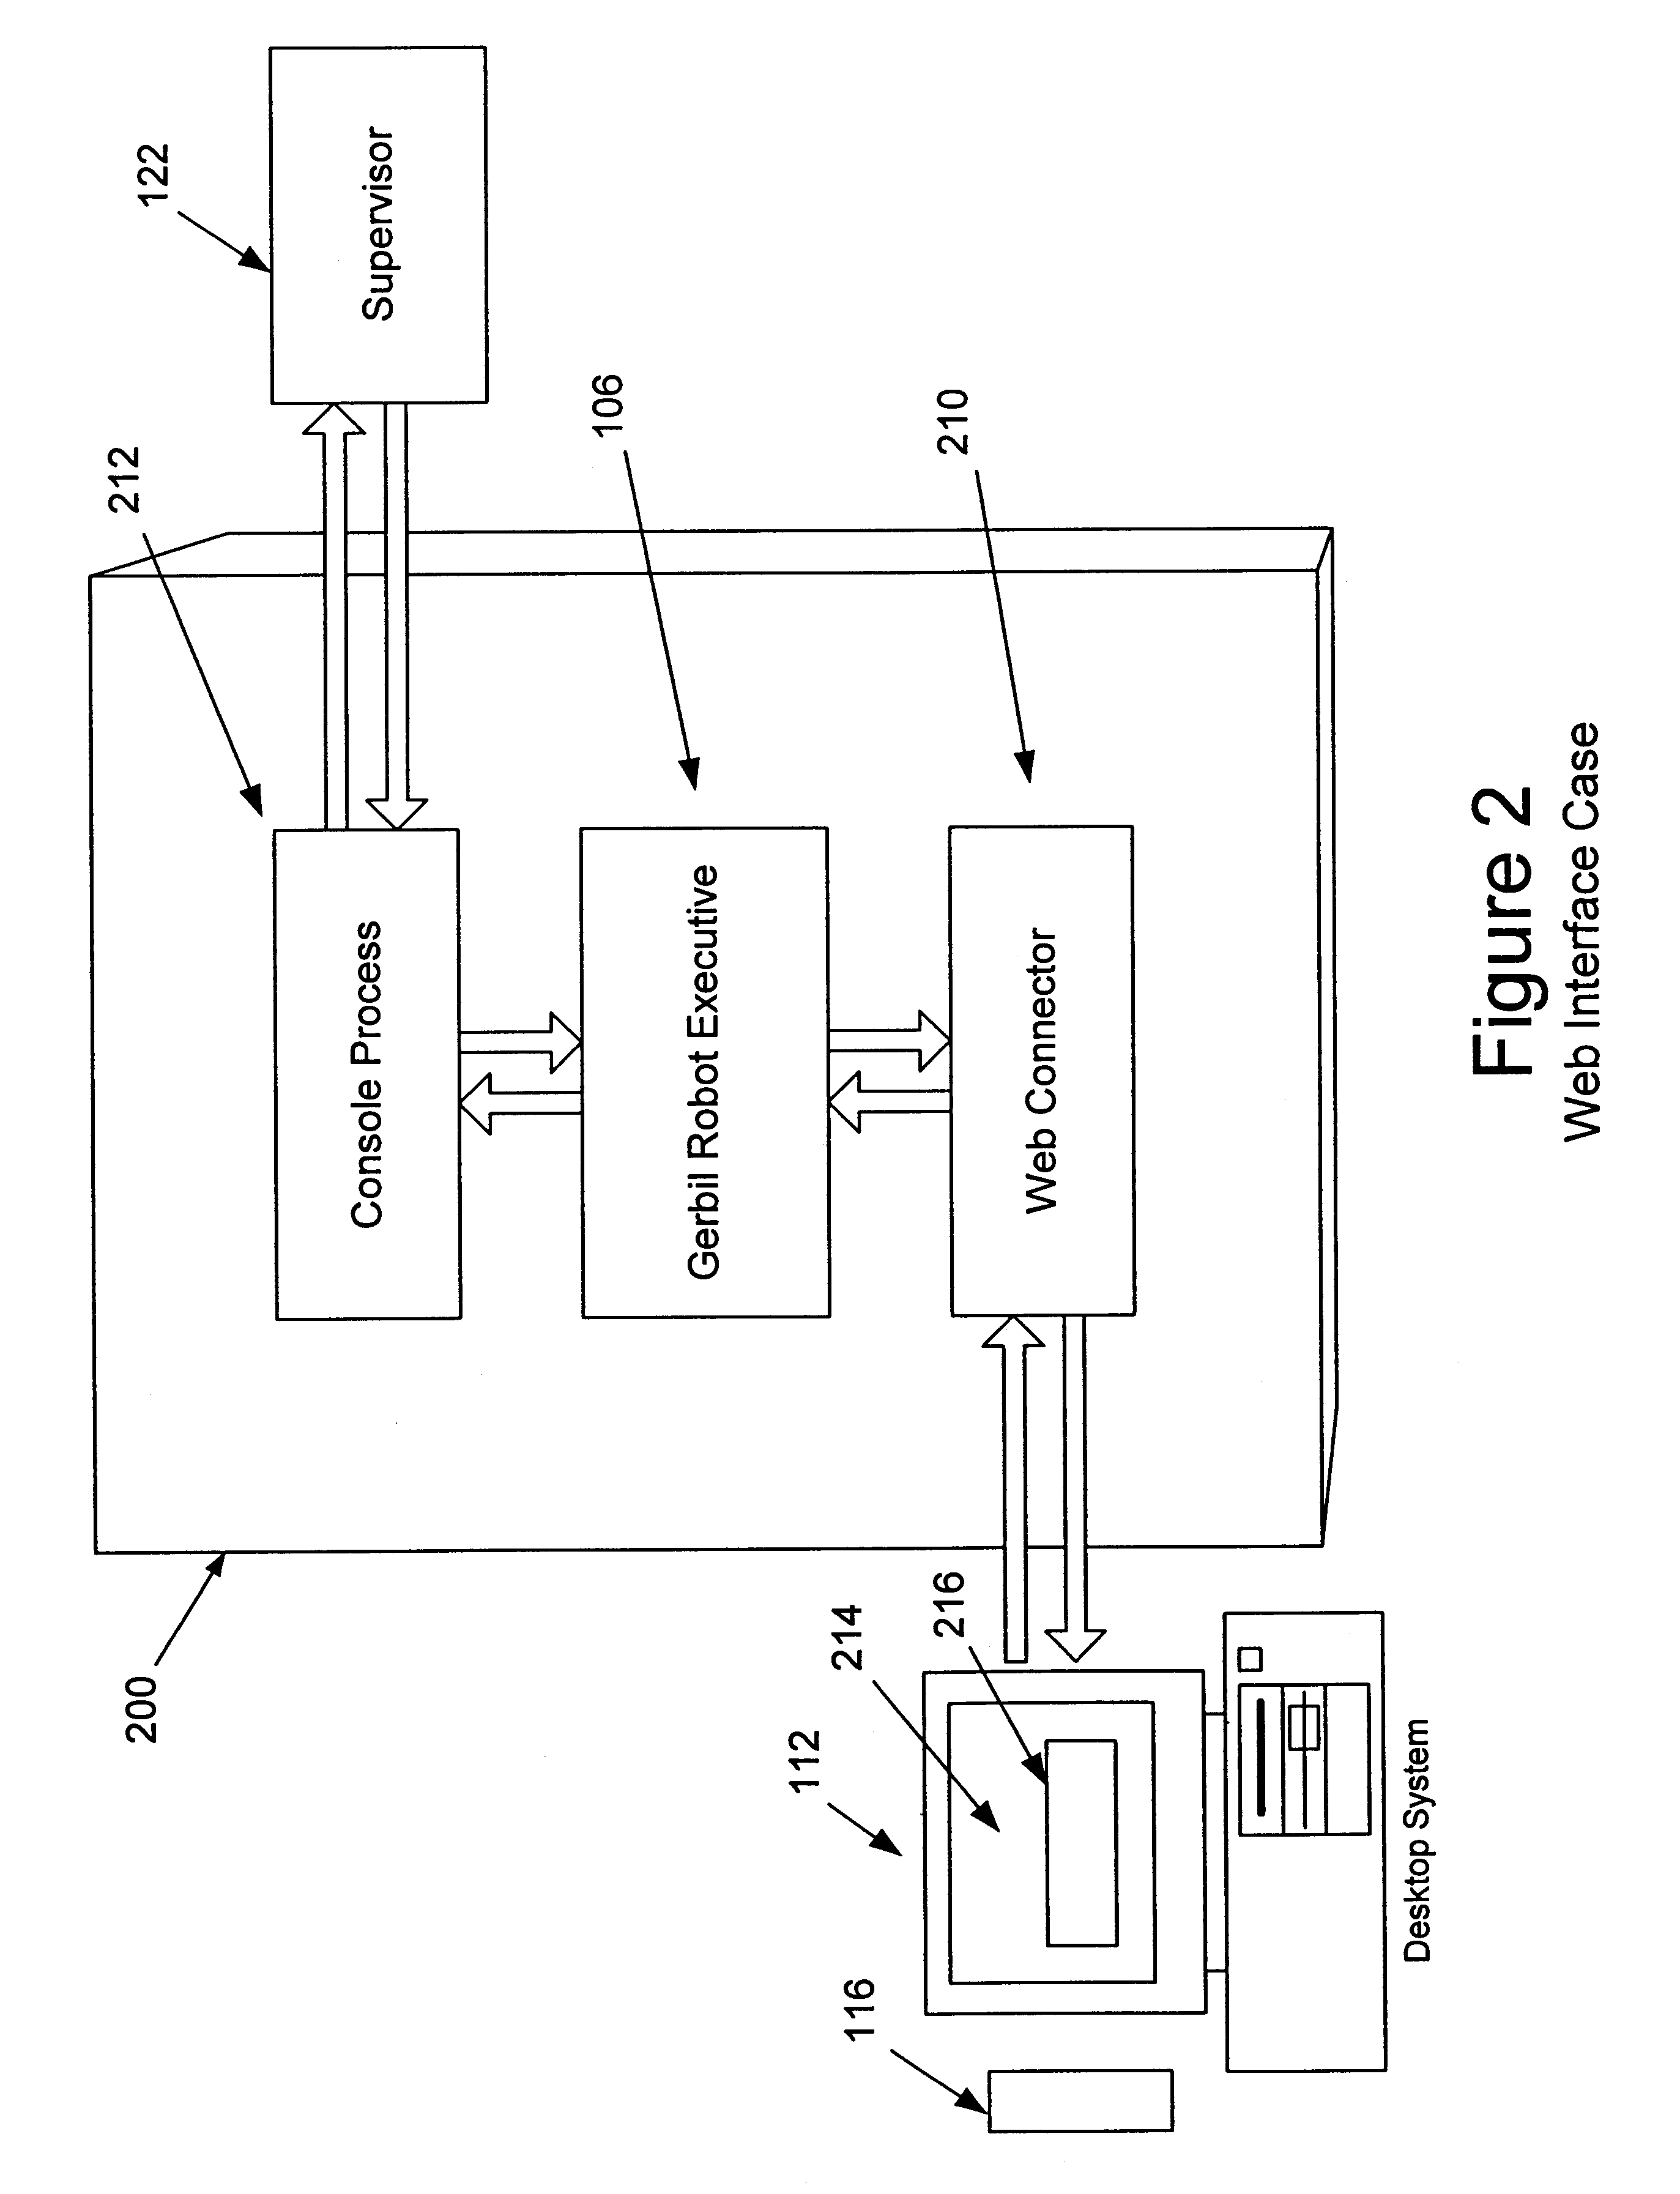 System and method for automatically verifying the performance of a virtual robot